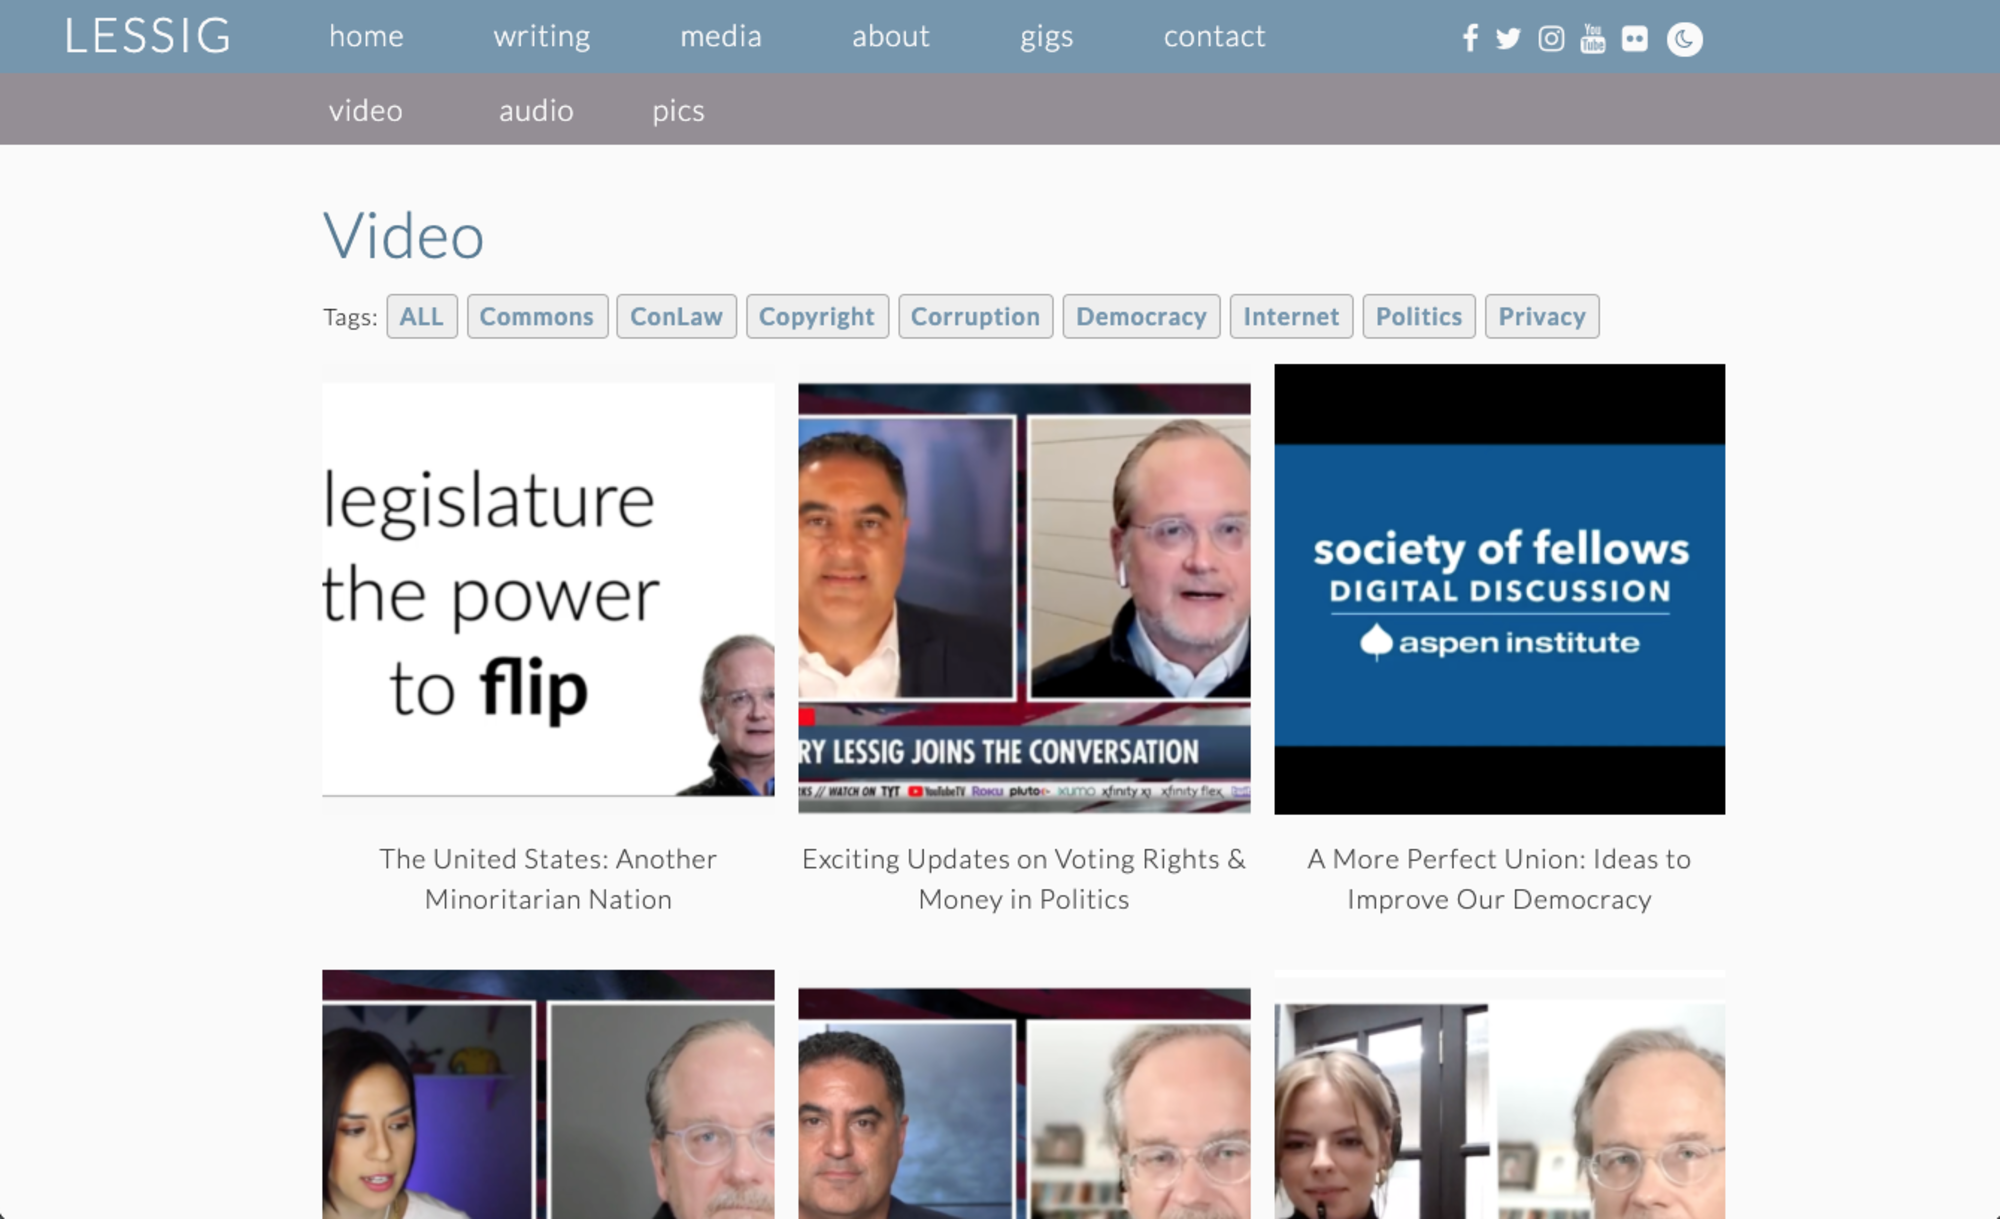 Lawrence Lessig media files on his website